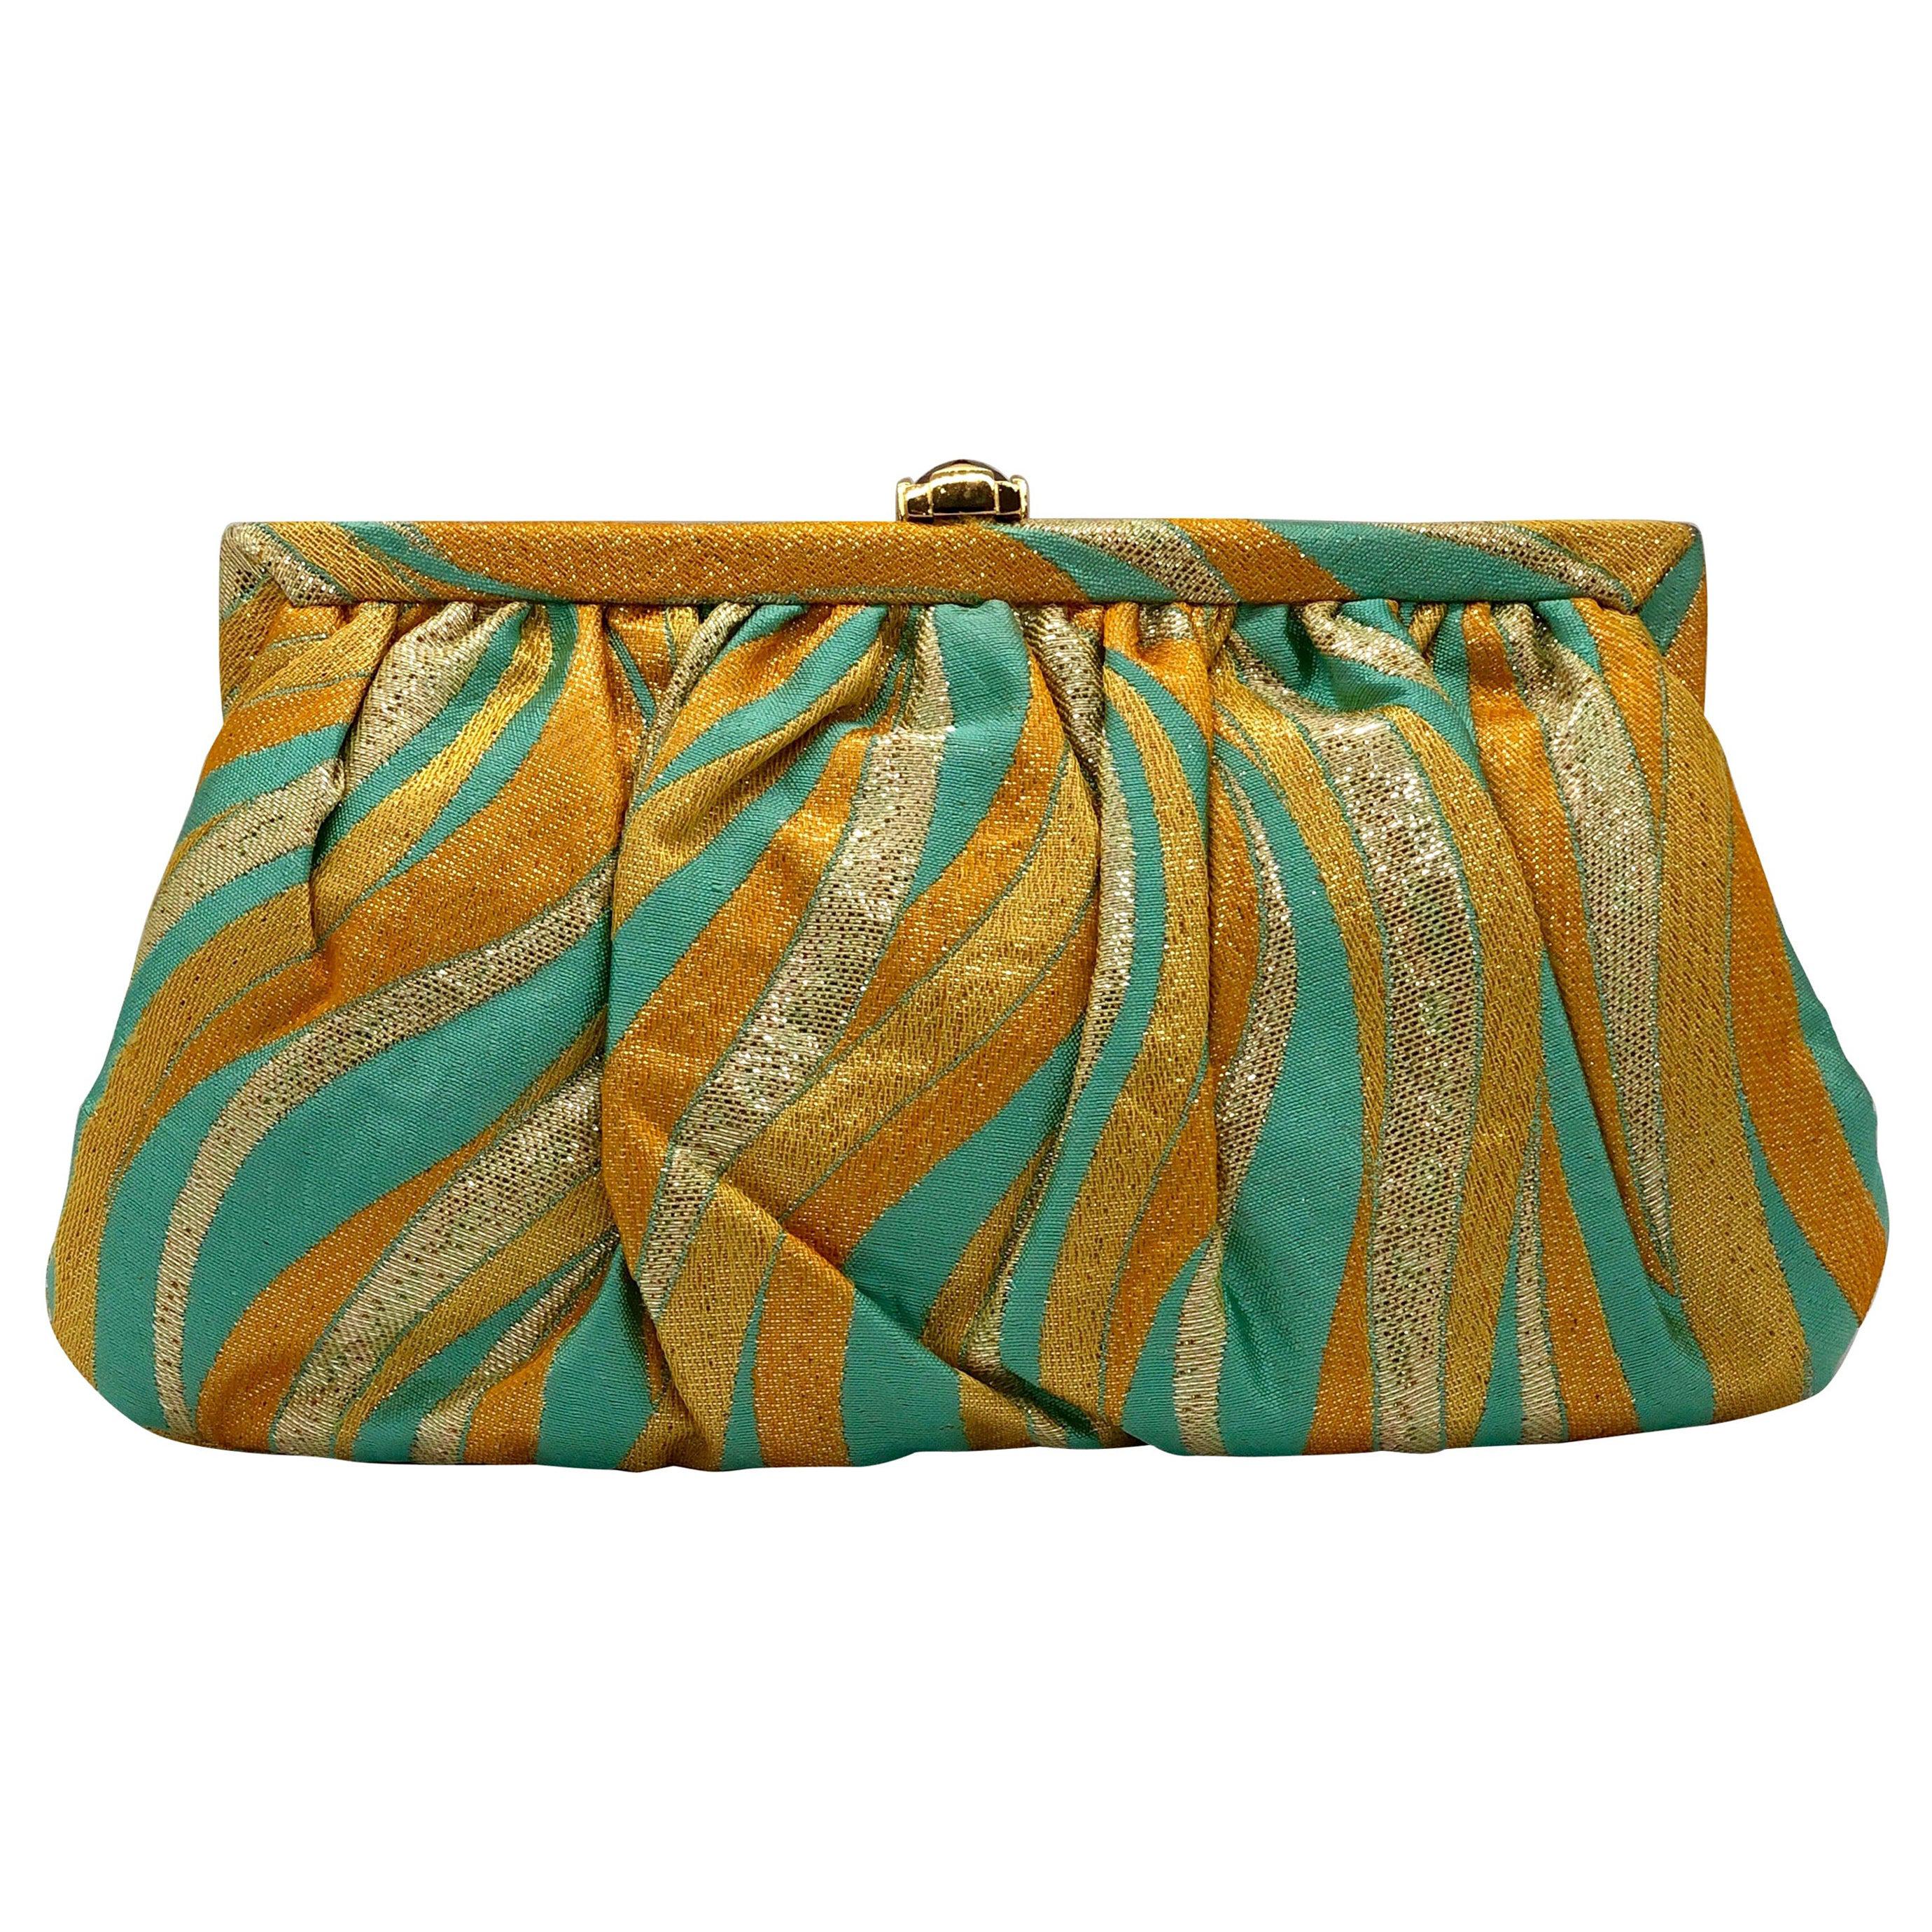 Kotur Metallic Yellow, Gold & Turquoise Silk w/ Gold Clasp & Chain Evening Bag For Sale